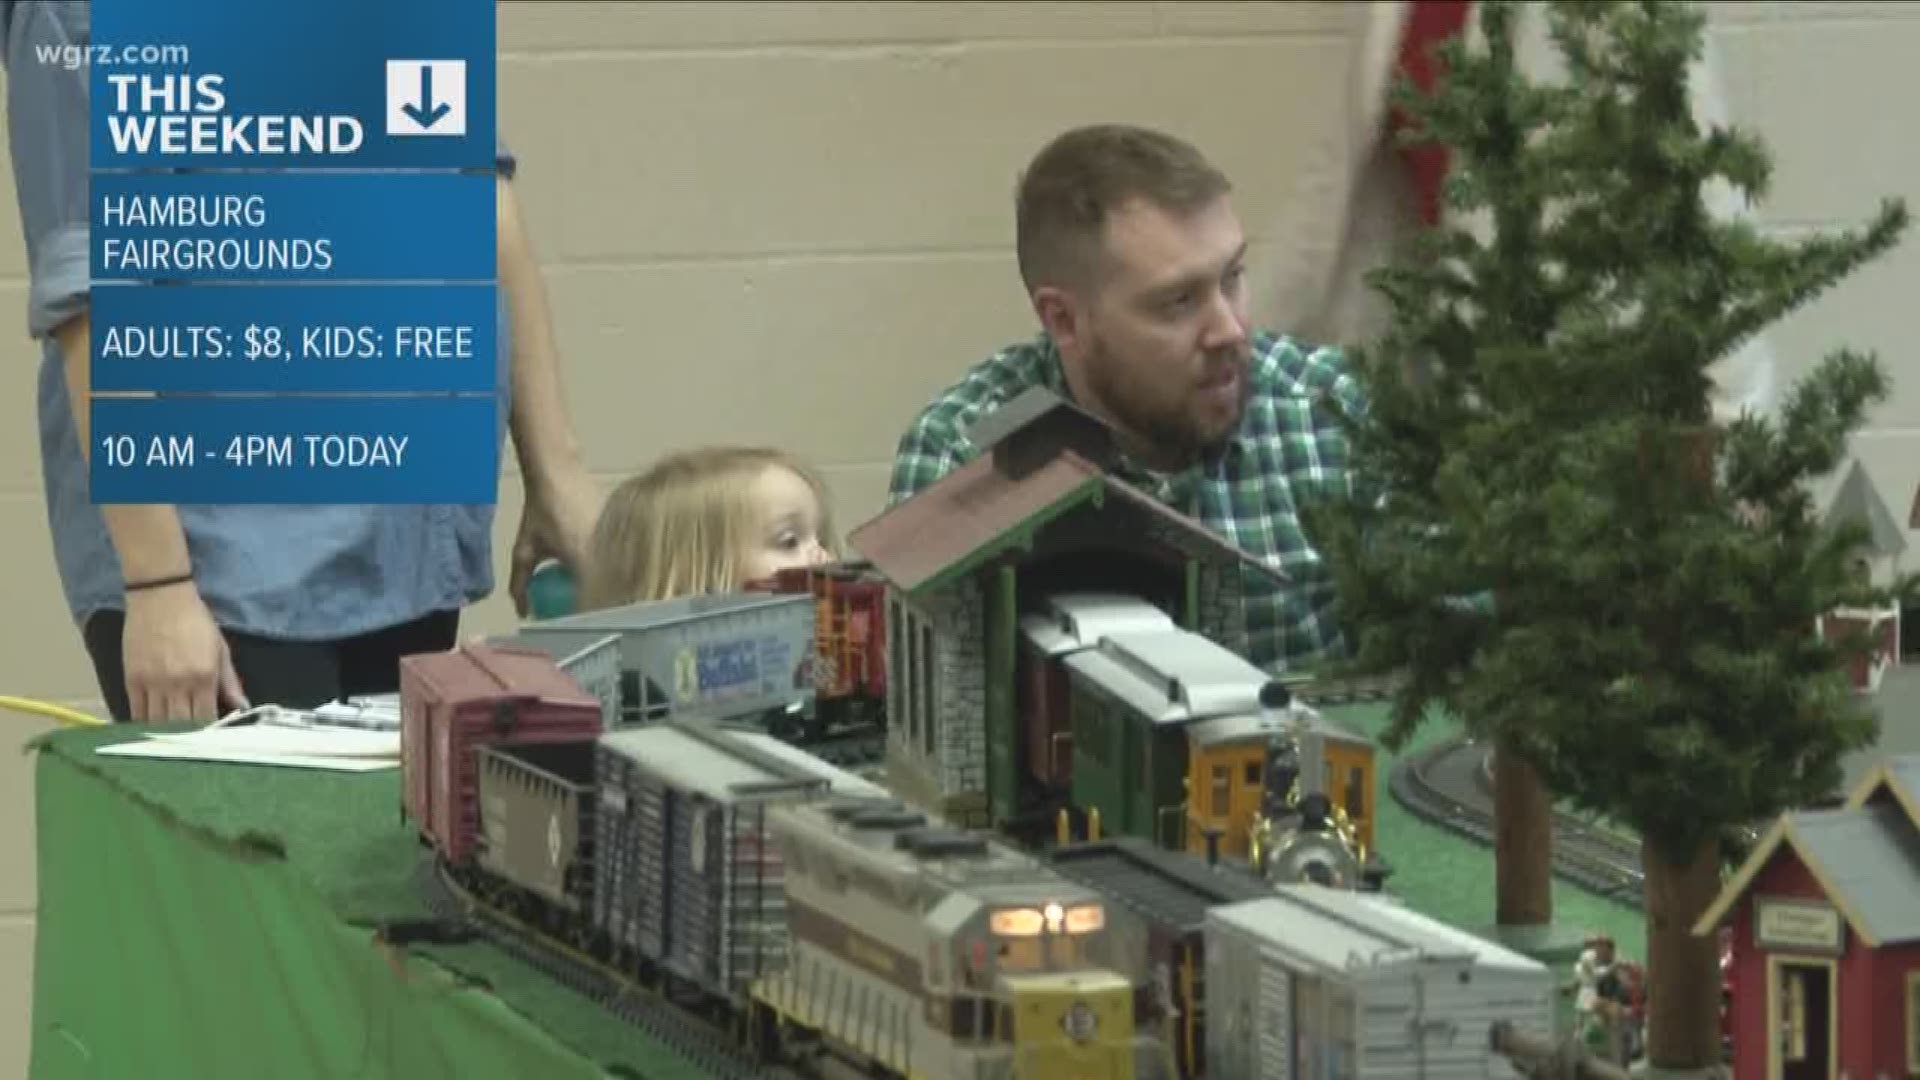 Sunday is the final day for the Western New York Railway Historical Society's Train and Toy Show.